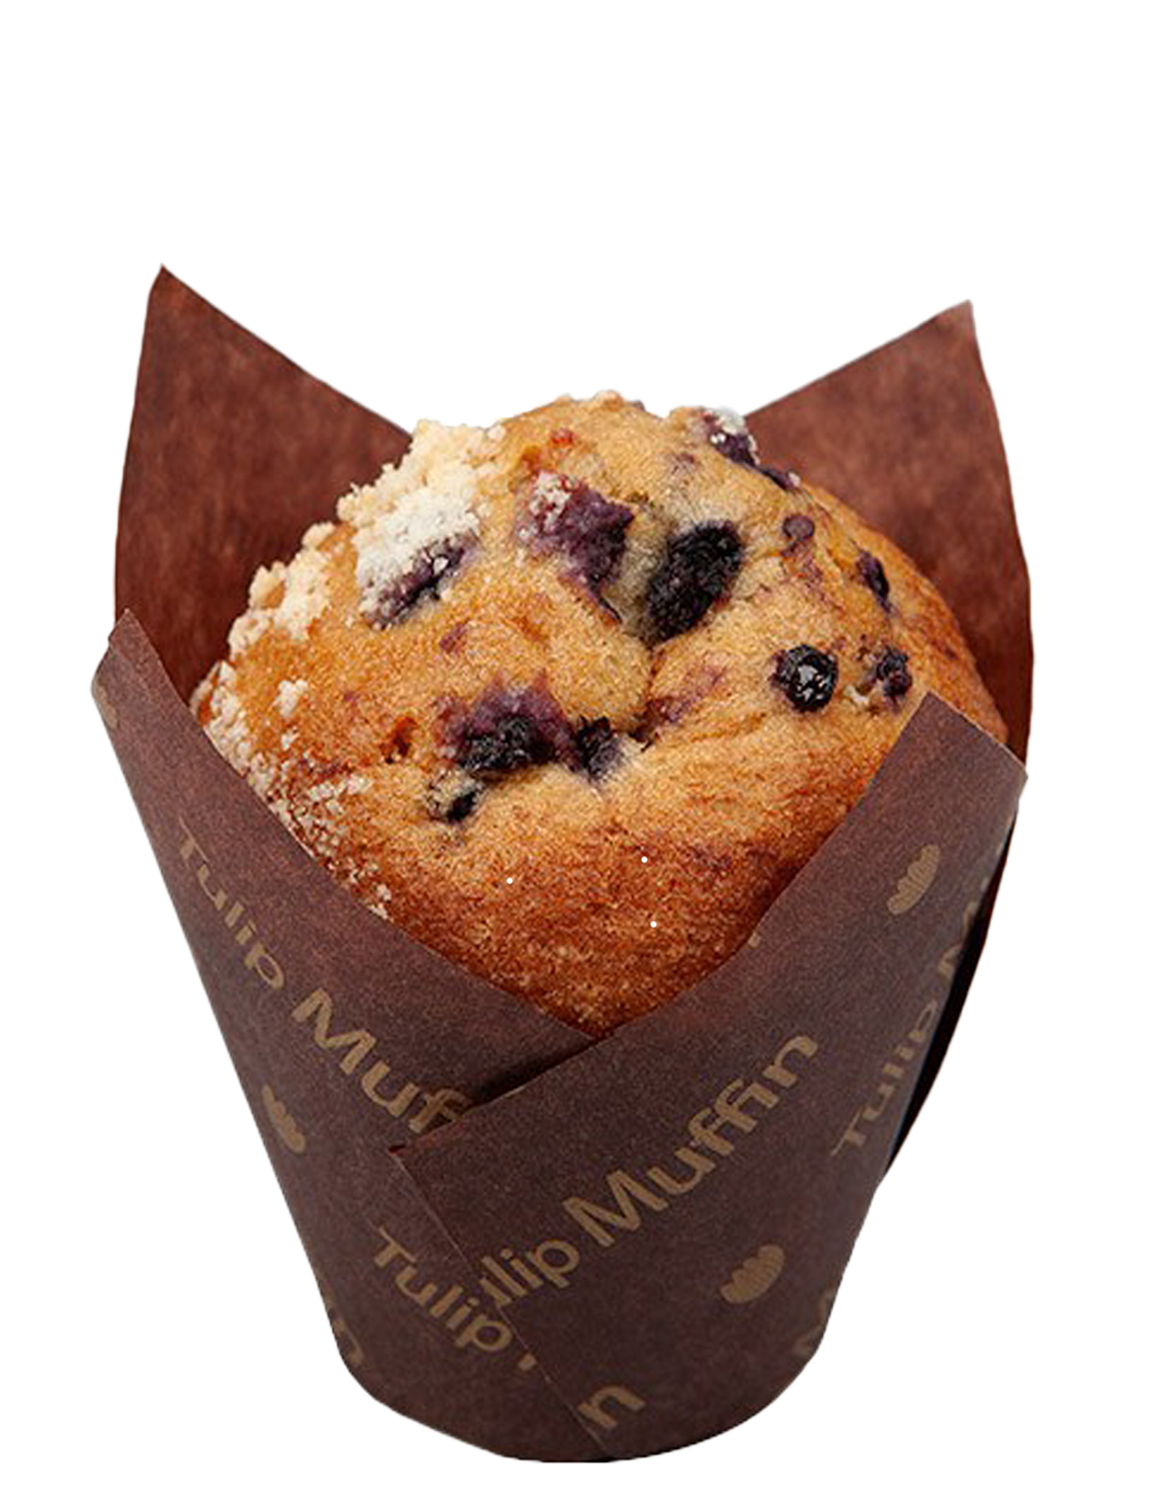 https://gofood.gr/wp-content/uploads/2022/03/muffin-3.png